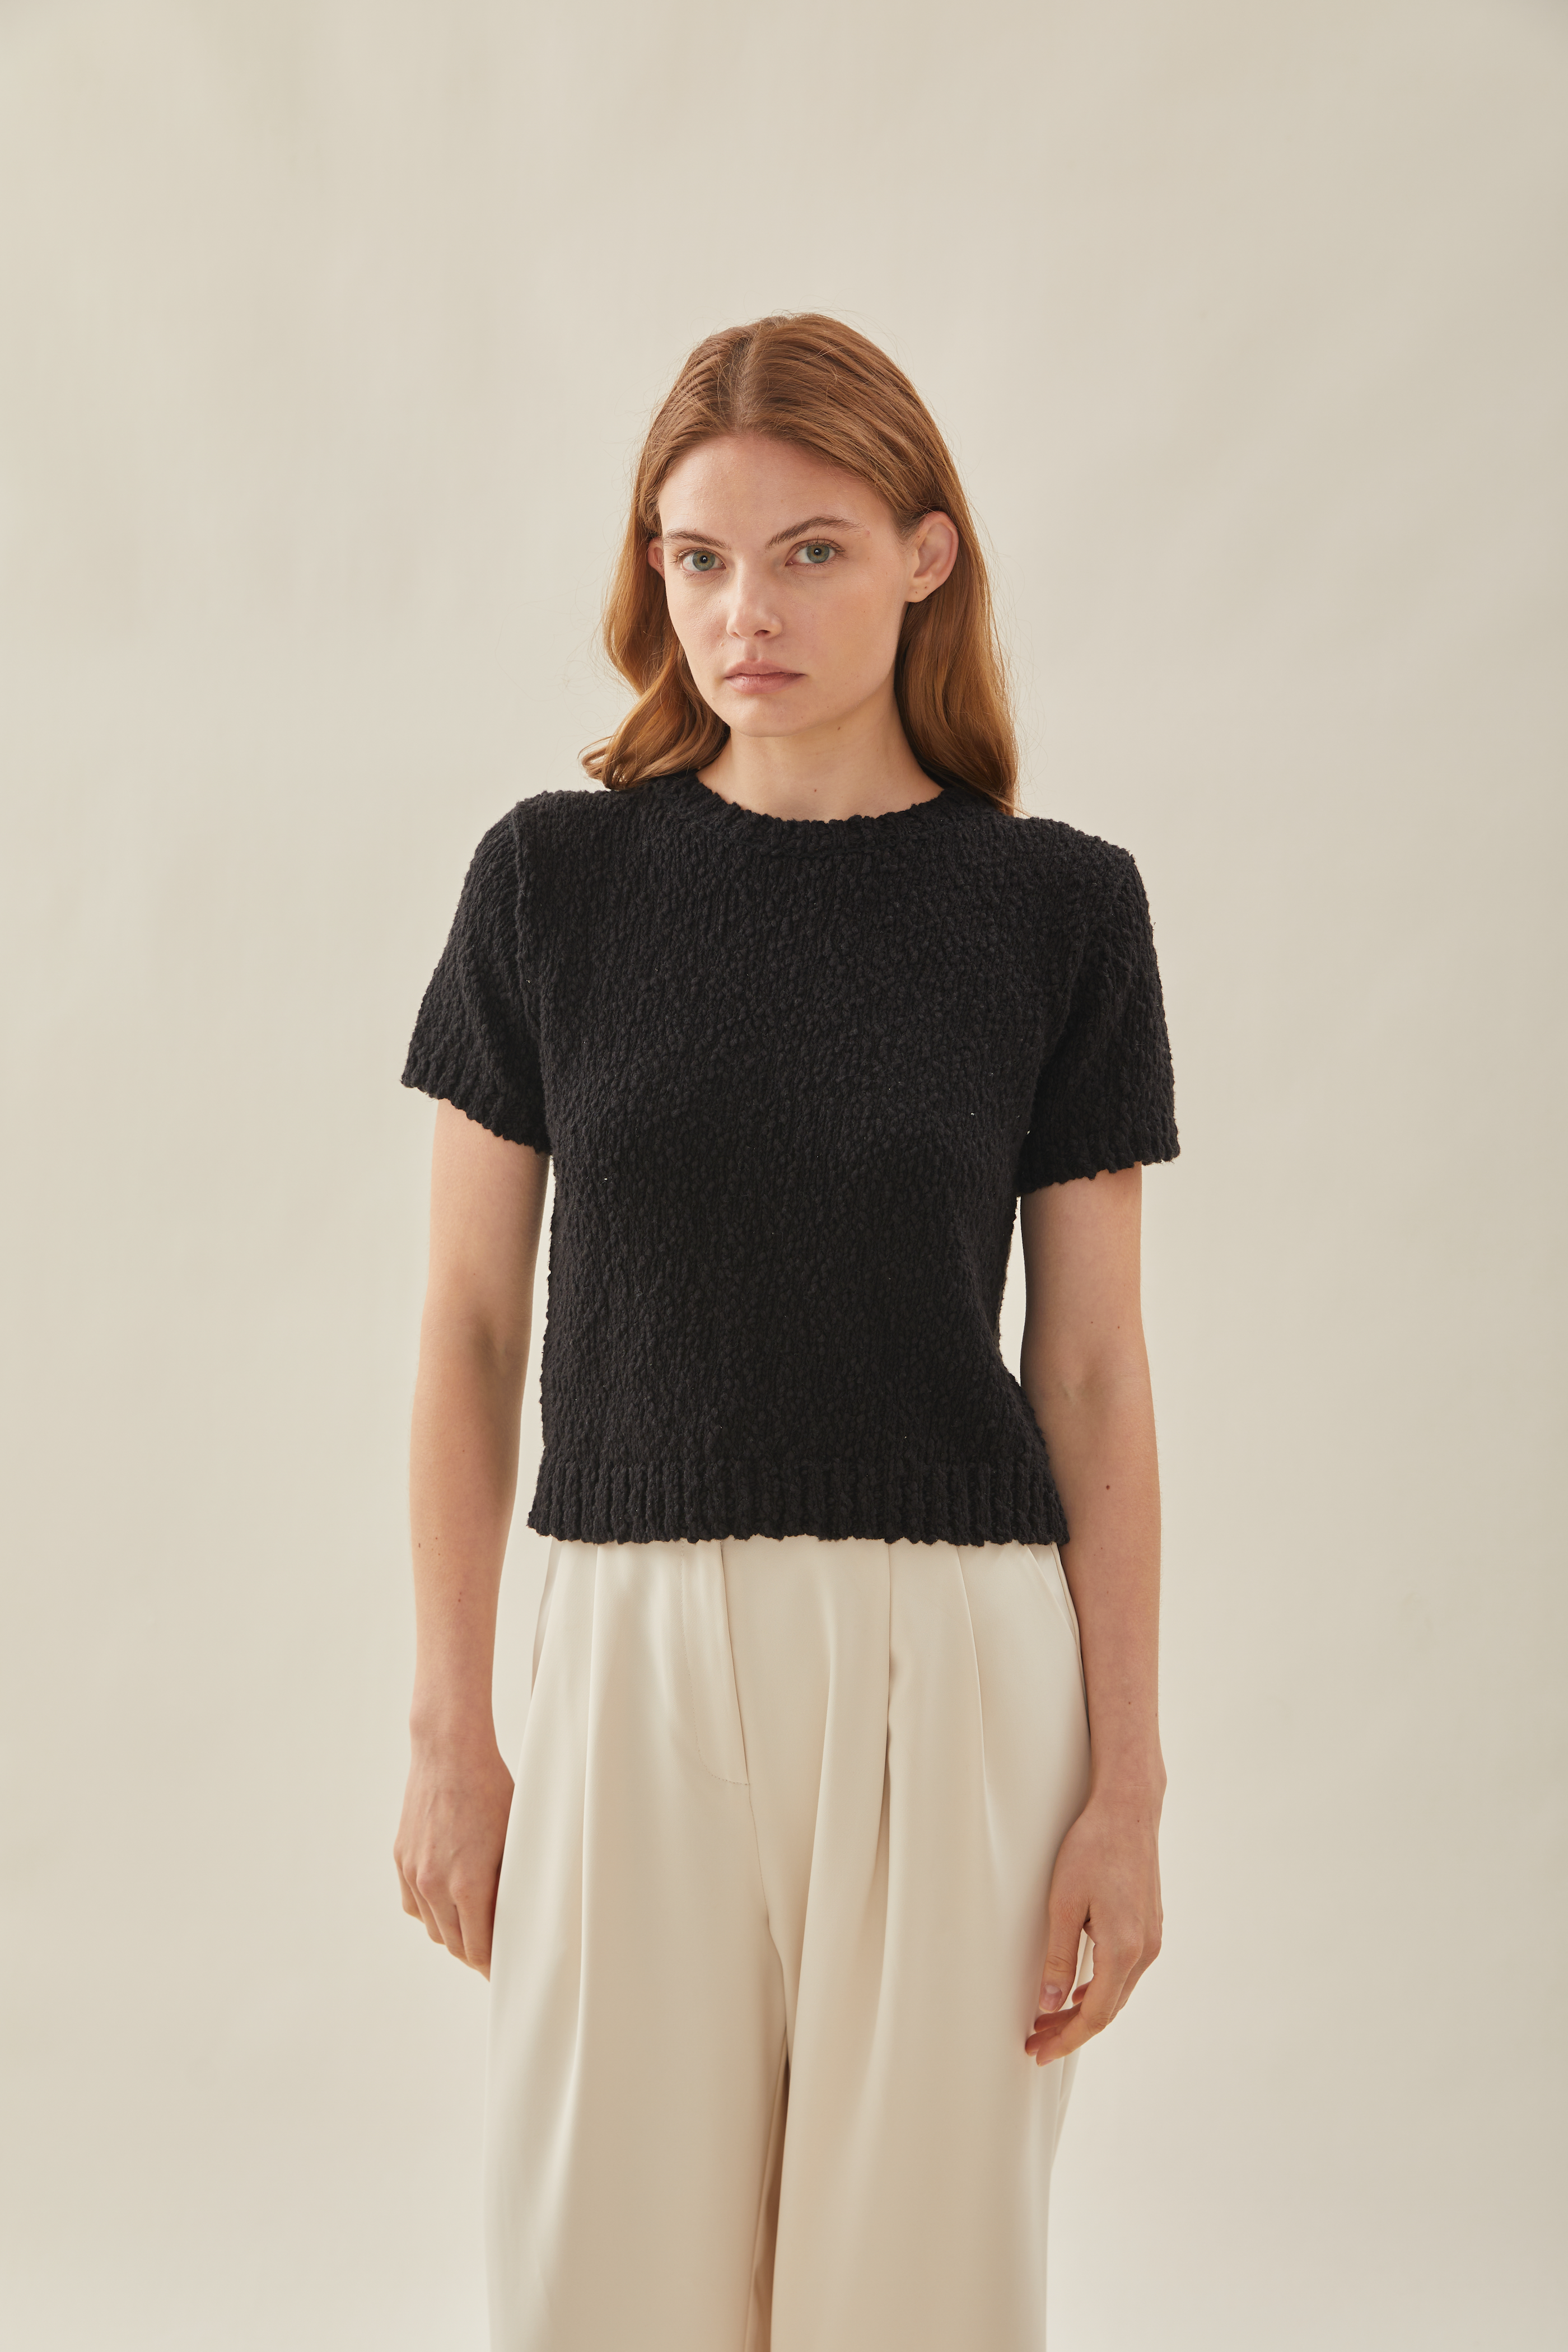 Textured Knit Top in Black